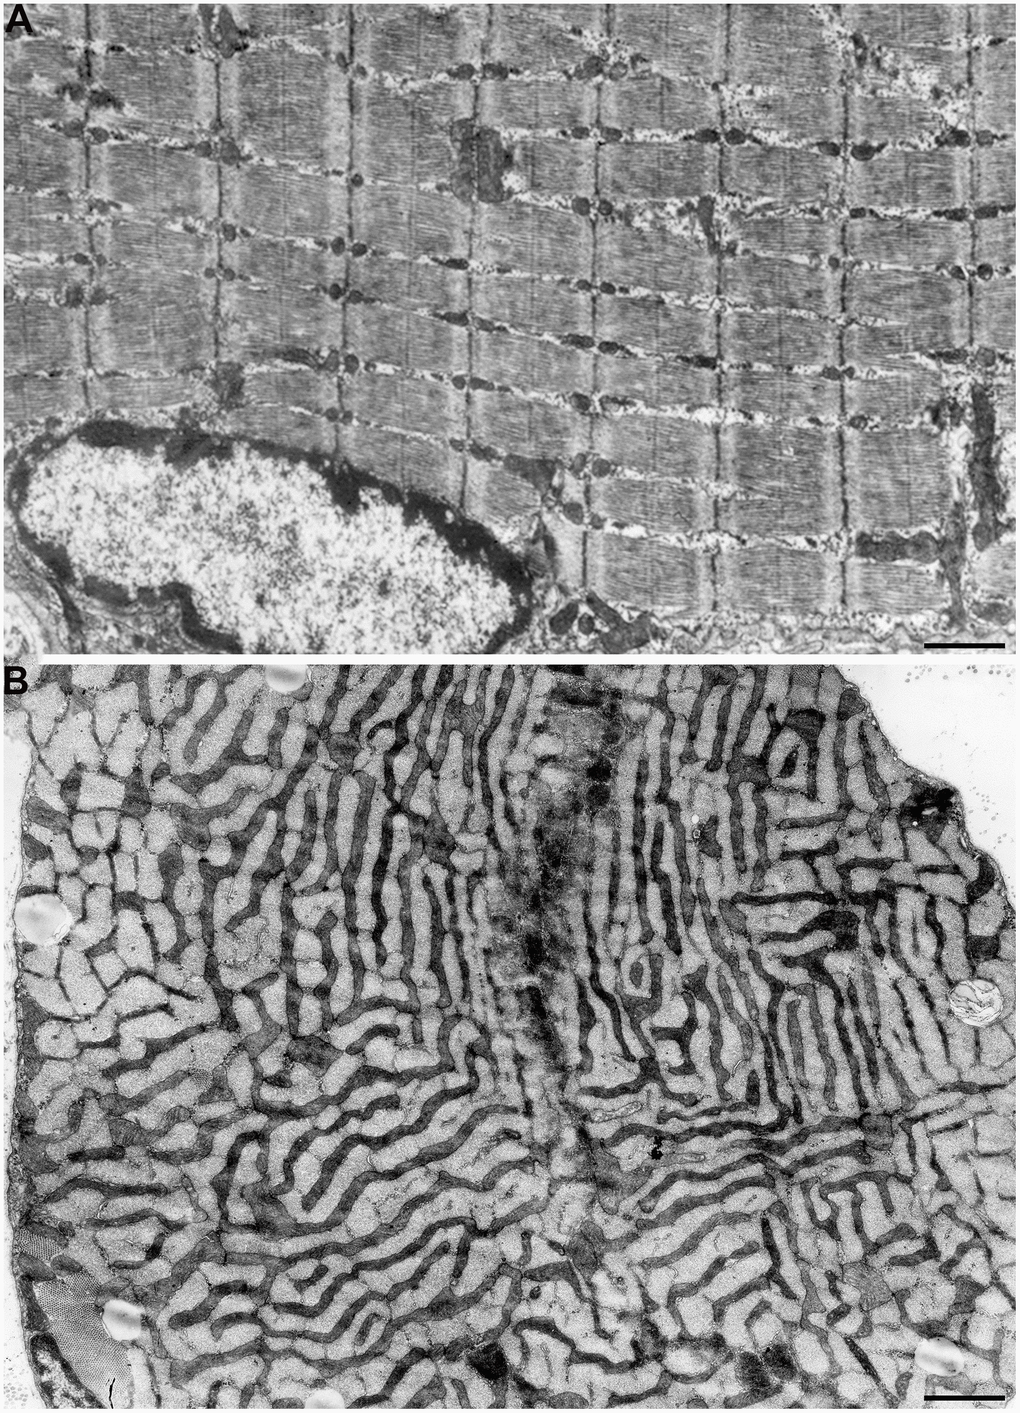 Mitochondrial reticulum in diaphragm of a two-month-old rat. (A) Longitudinal section. (B) Cross section through isotropic region. (from Bakeeva et al. [40]).